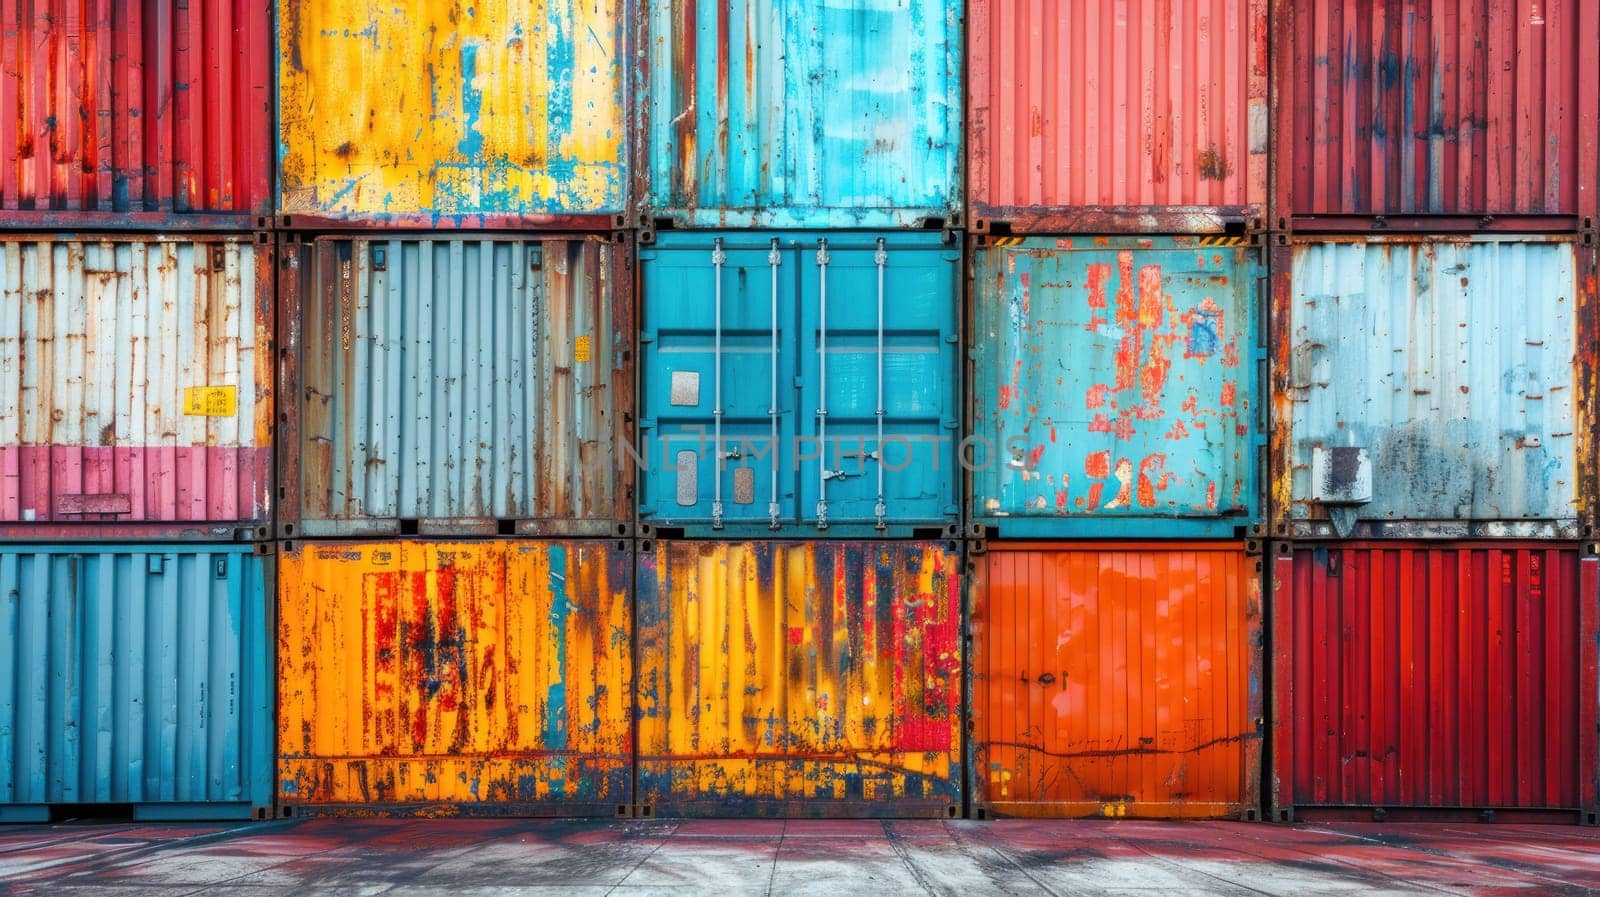 A row of containers with different colors and sizes stacked on top of each other by golfmerrymaker